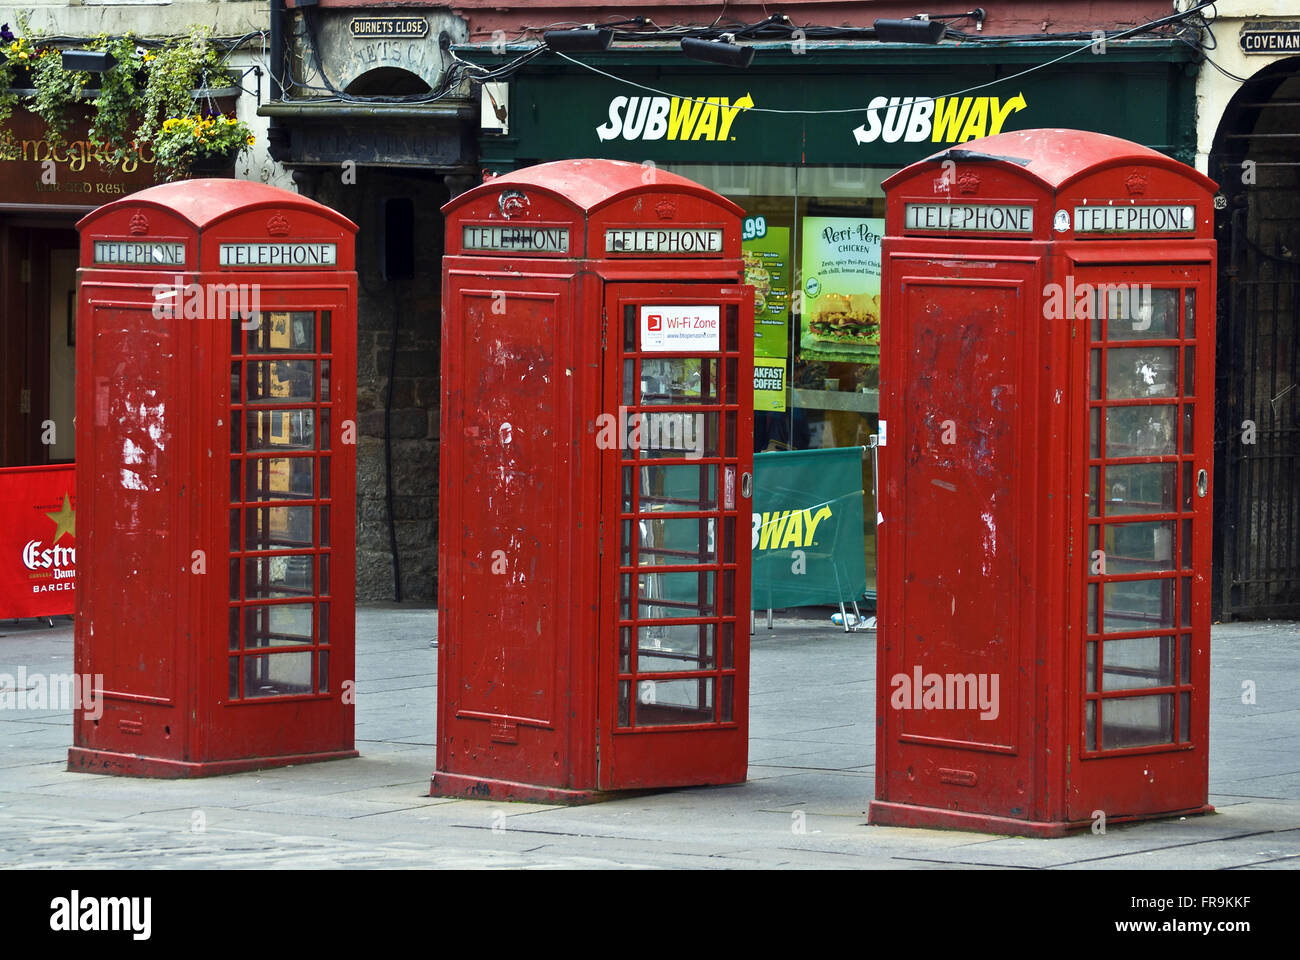 Telephone booths in front of a diner in the city of Edinburgh - Scotland Stock Photo